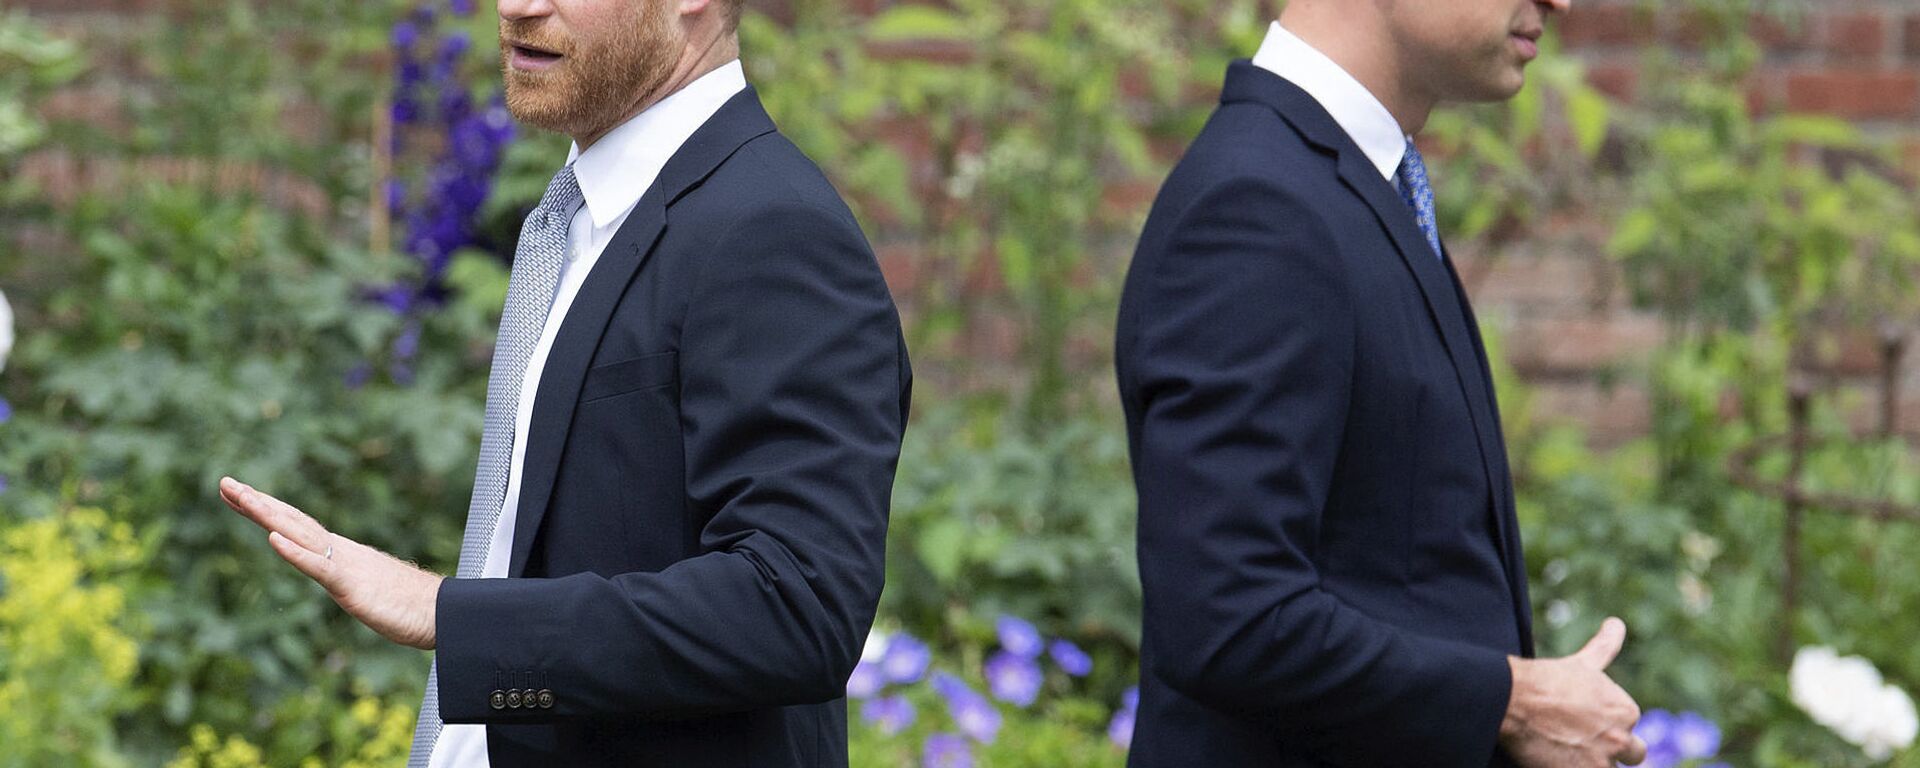 Prince Harry, left, and Prince William stand together during the unveiling of a statue they commissioned of their mother Princess Diana, on what woud have been her 60th birthday, in the Sunken Garden at Kensington Palace, London, Thursday July 1, 2021 - Sputnik International, 1920, 18.06.2022